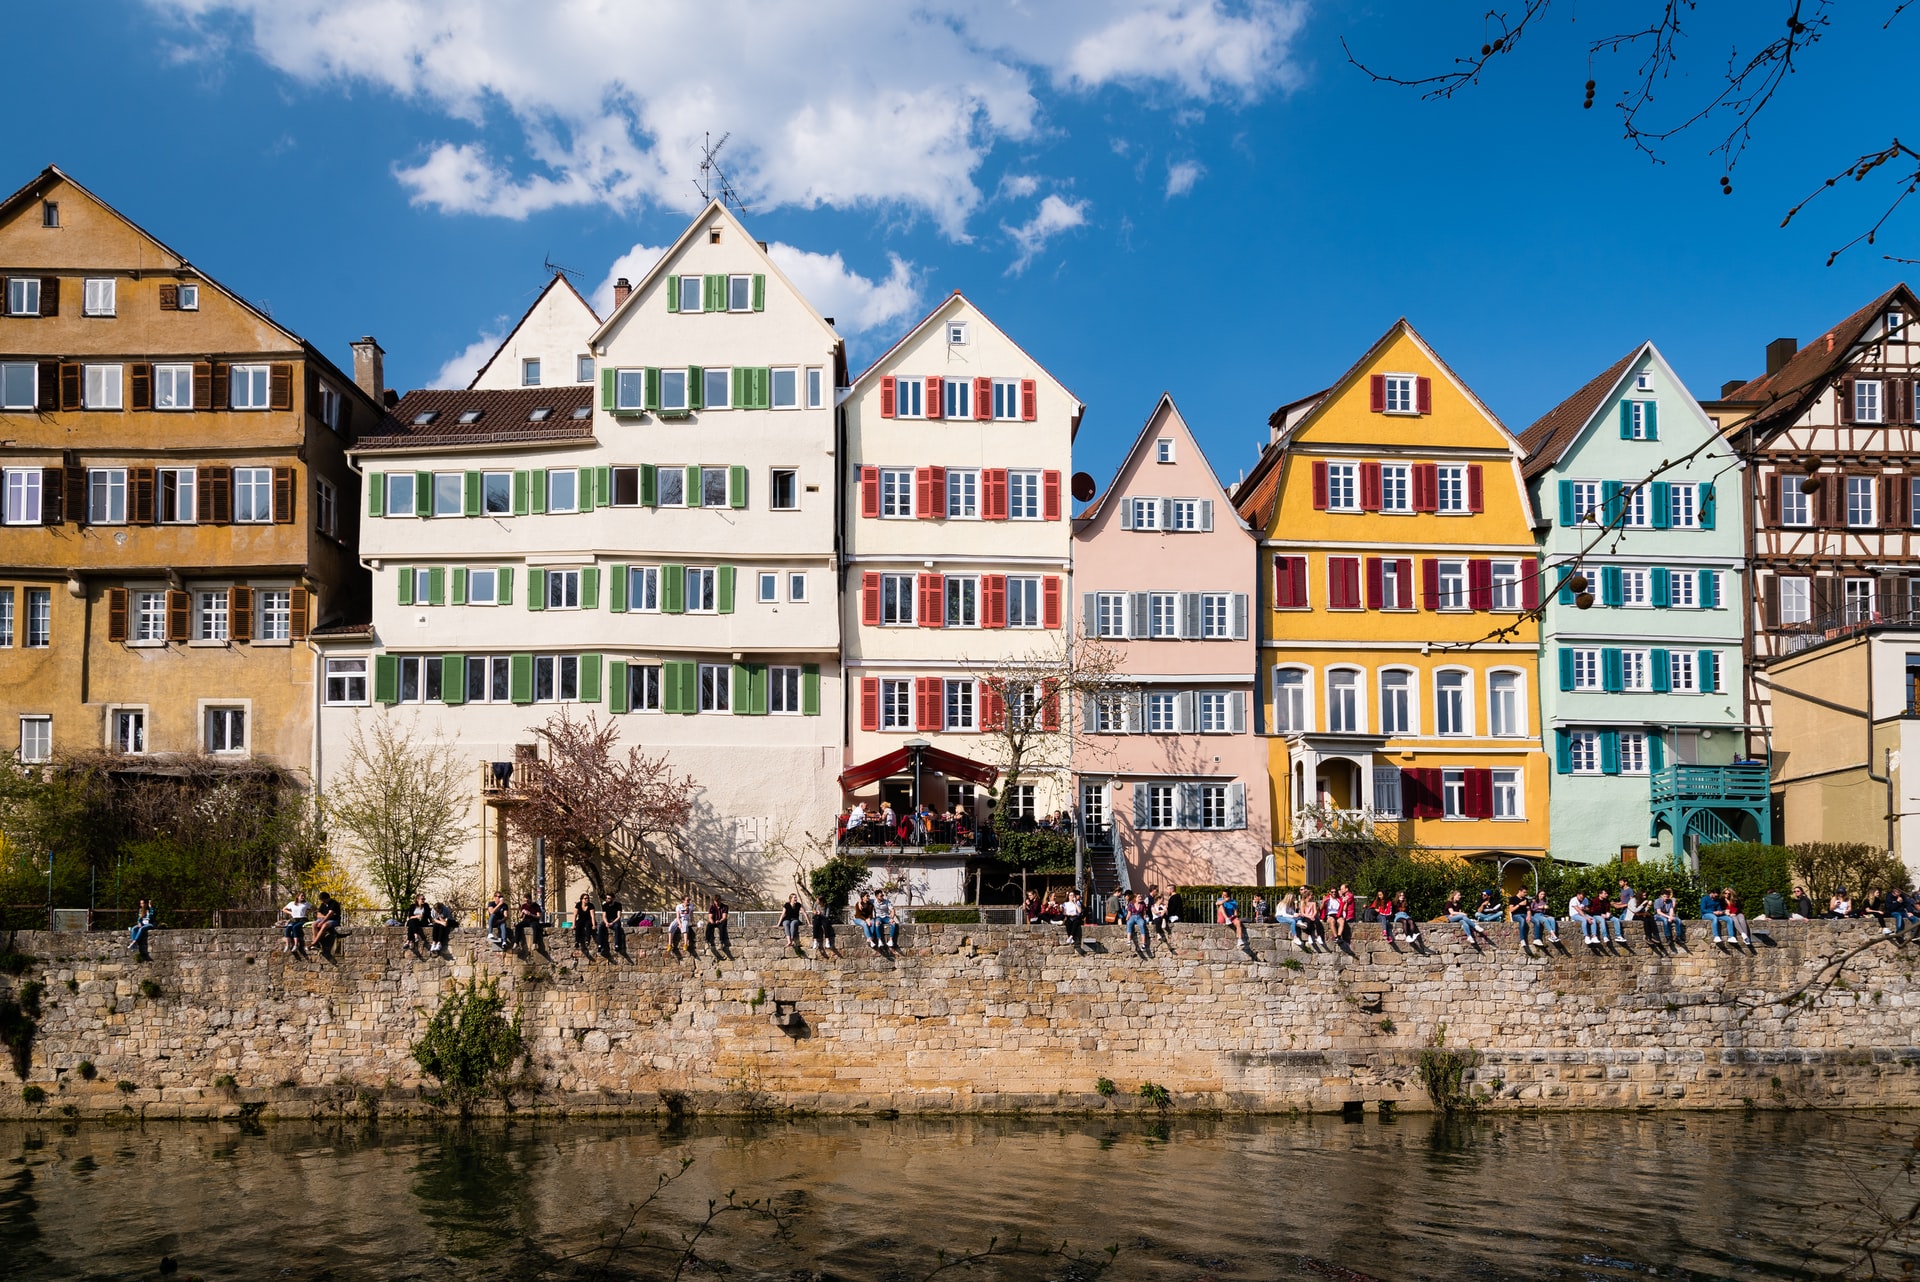 Colourful houses at the river. People are sitting on the wall enjoying the sun.